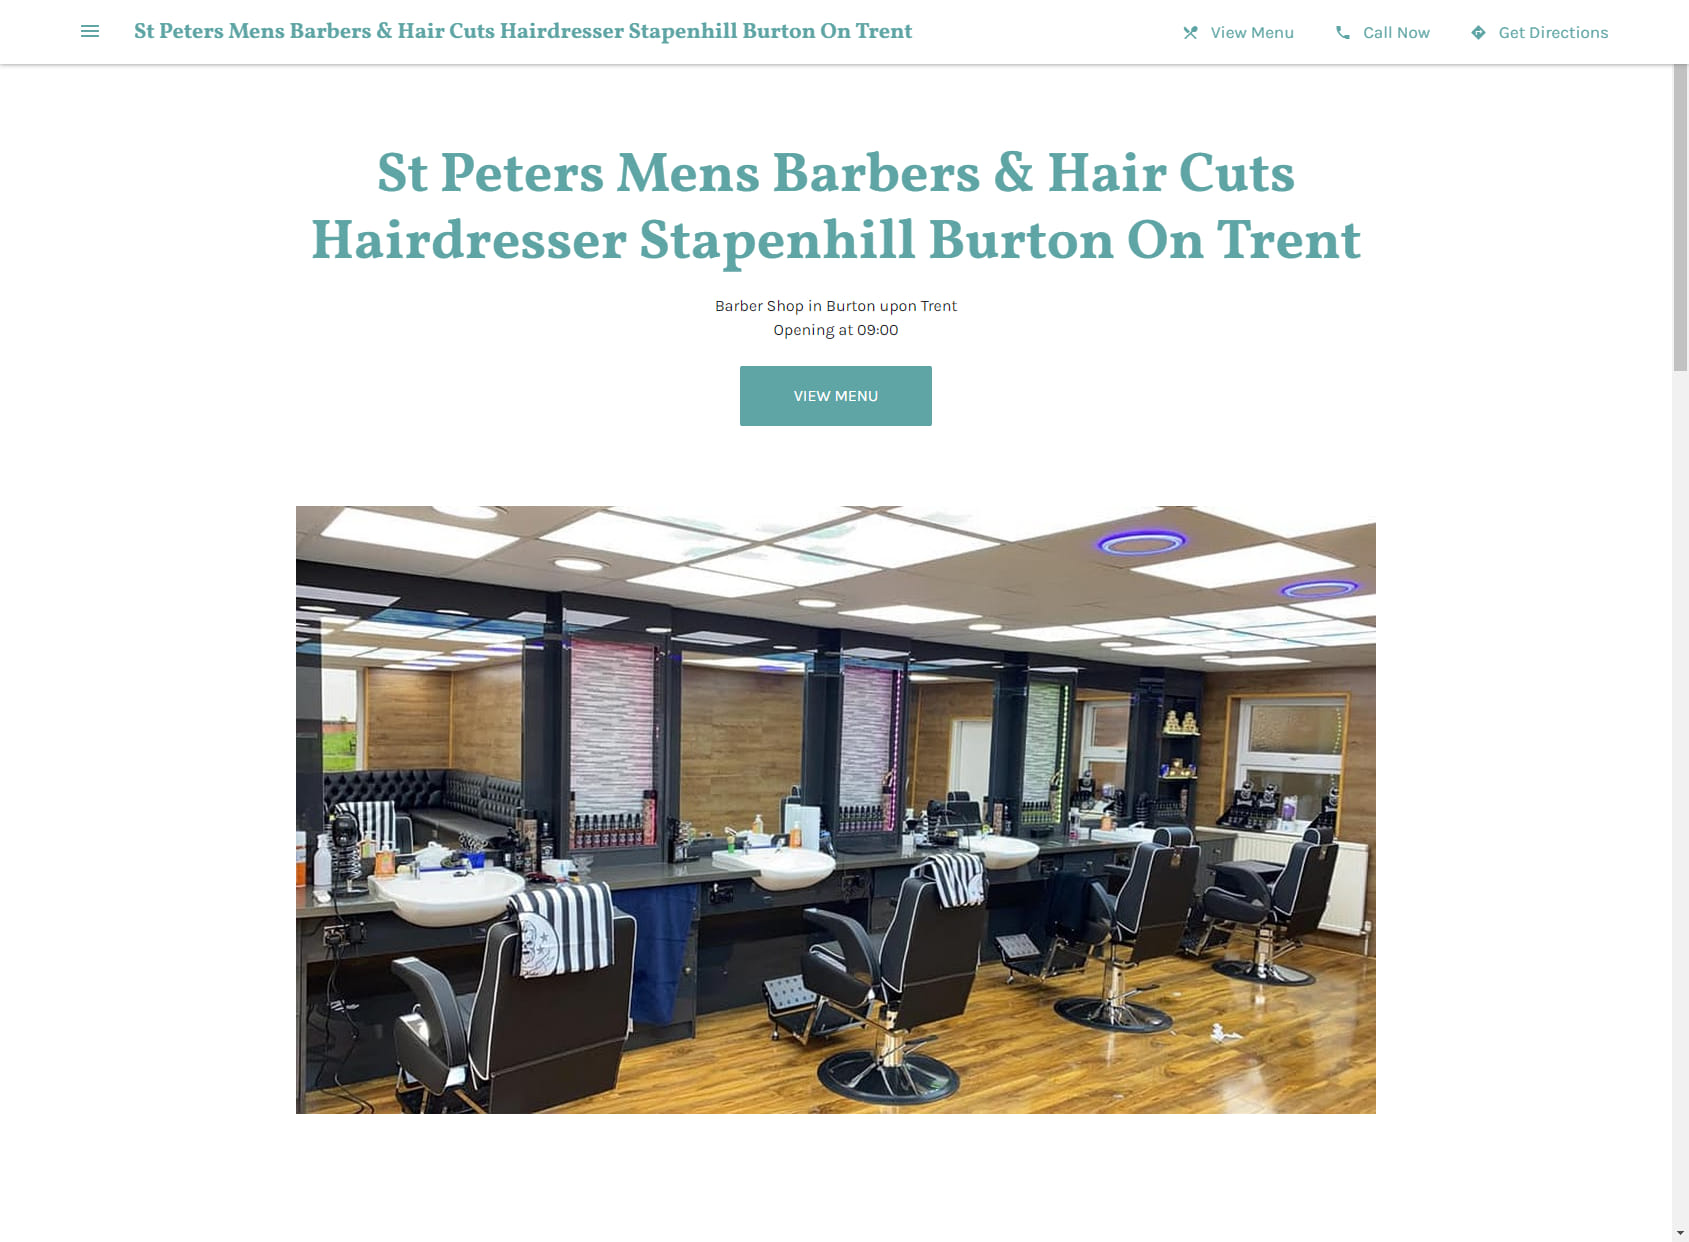 St Peters Mens Barbers & Hair Cuts Hairdresser Stapenhill Burton On Trent